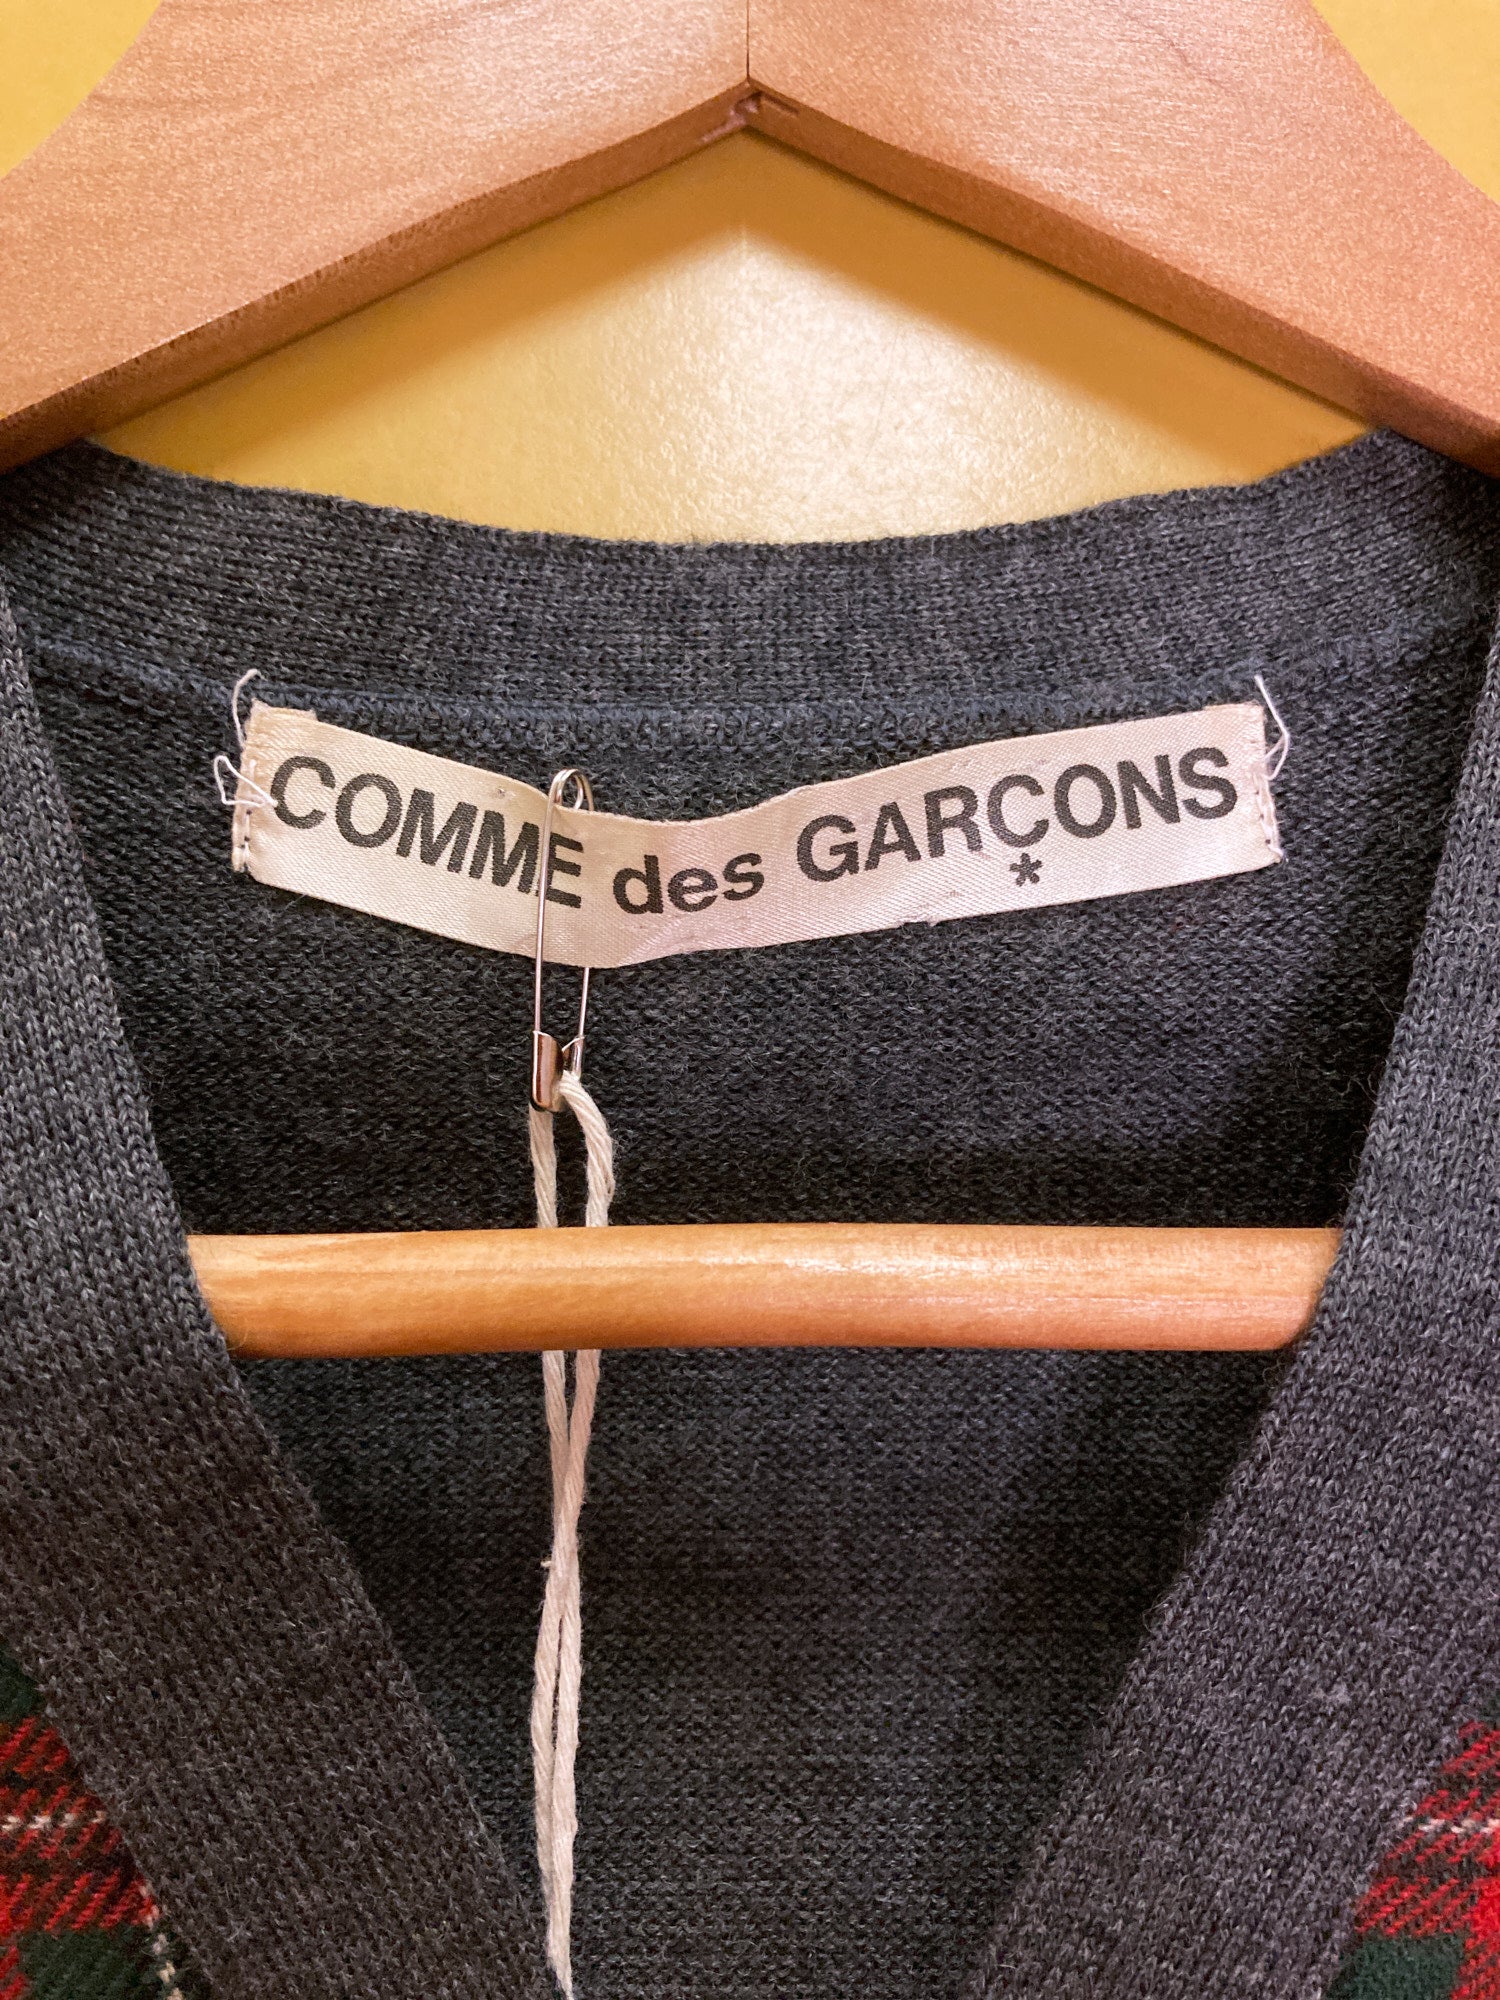 Comme des Garcons 1980s grey wool cardigan with red tartan front